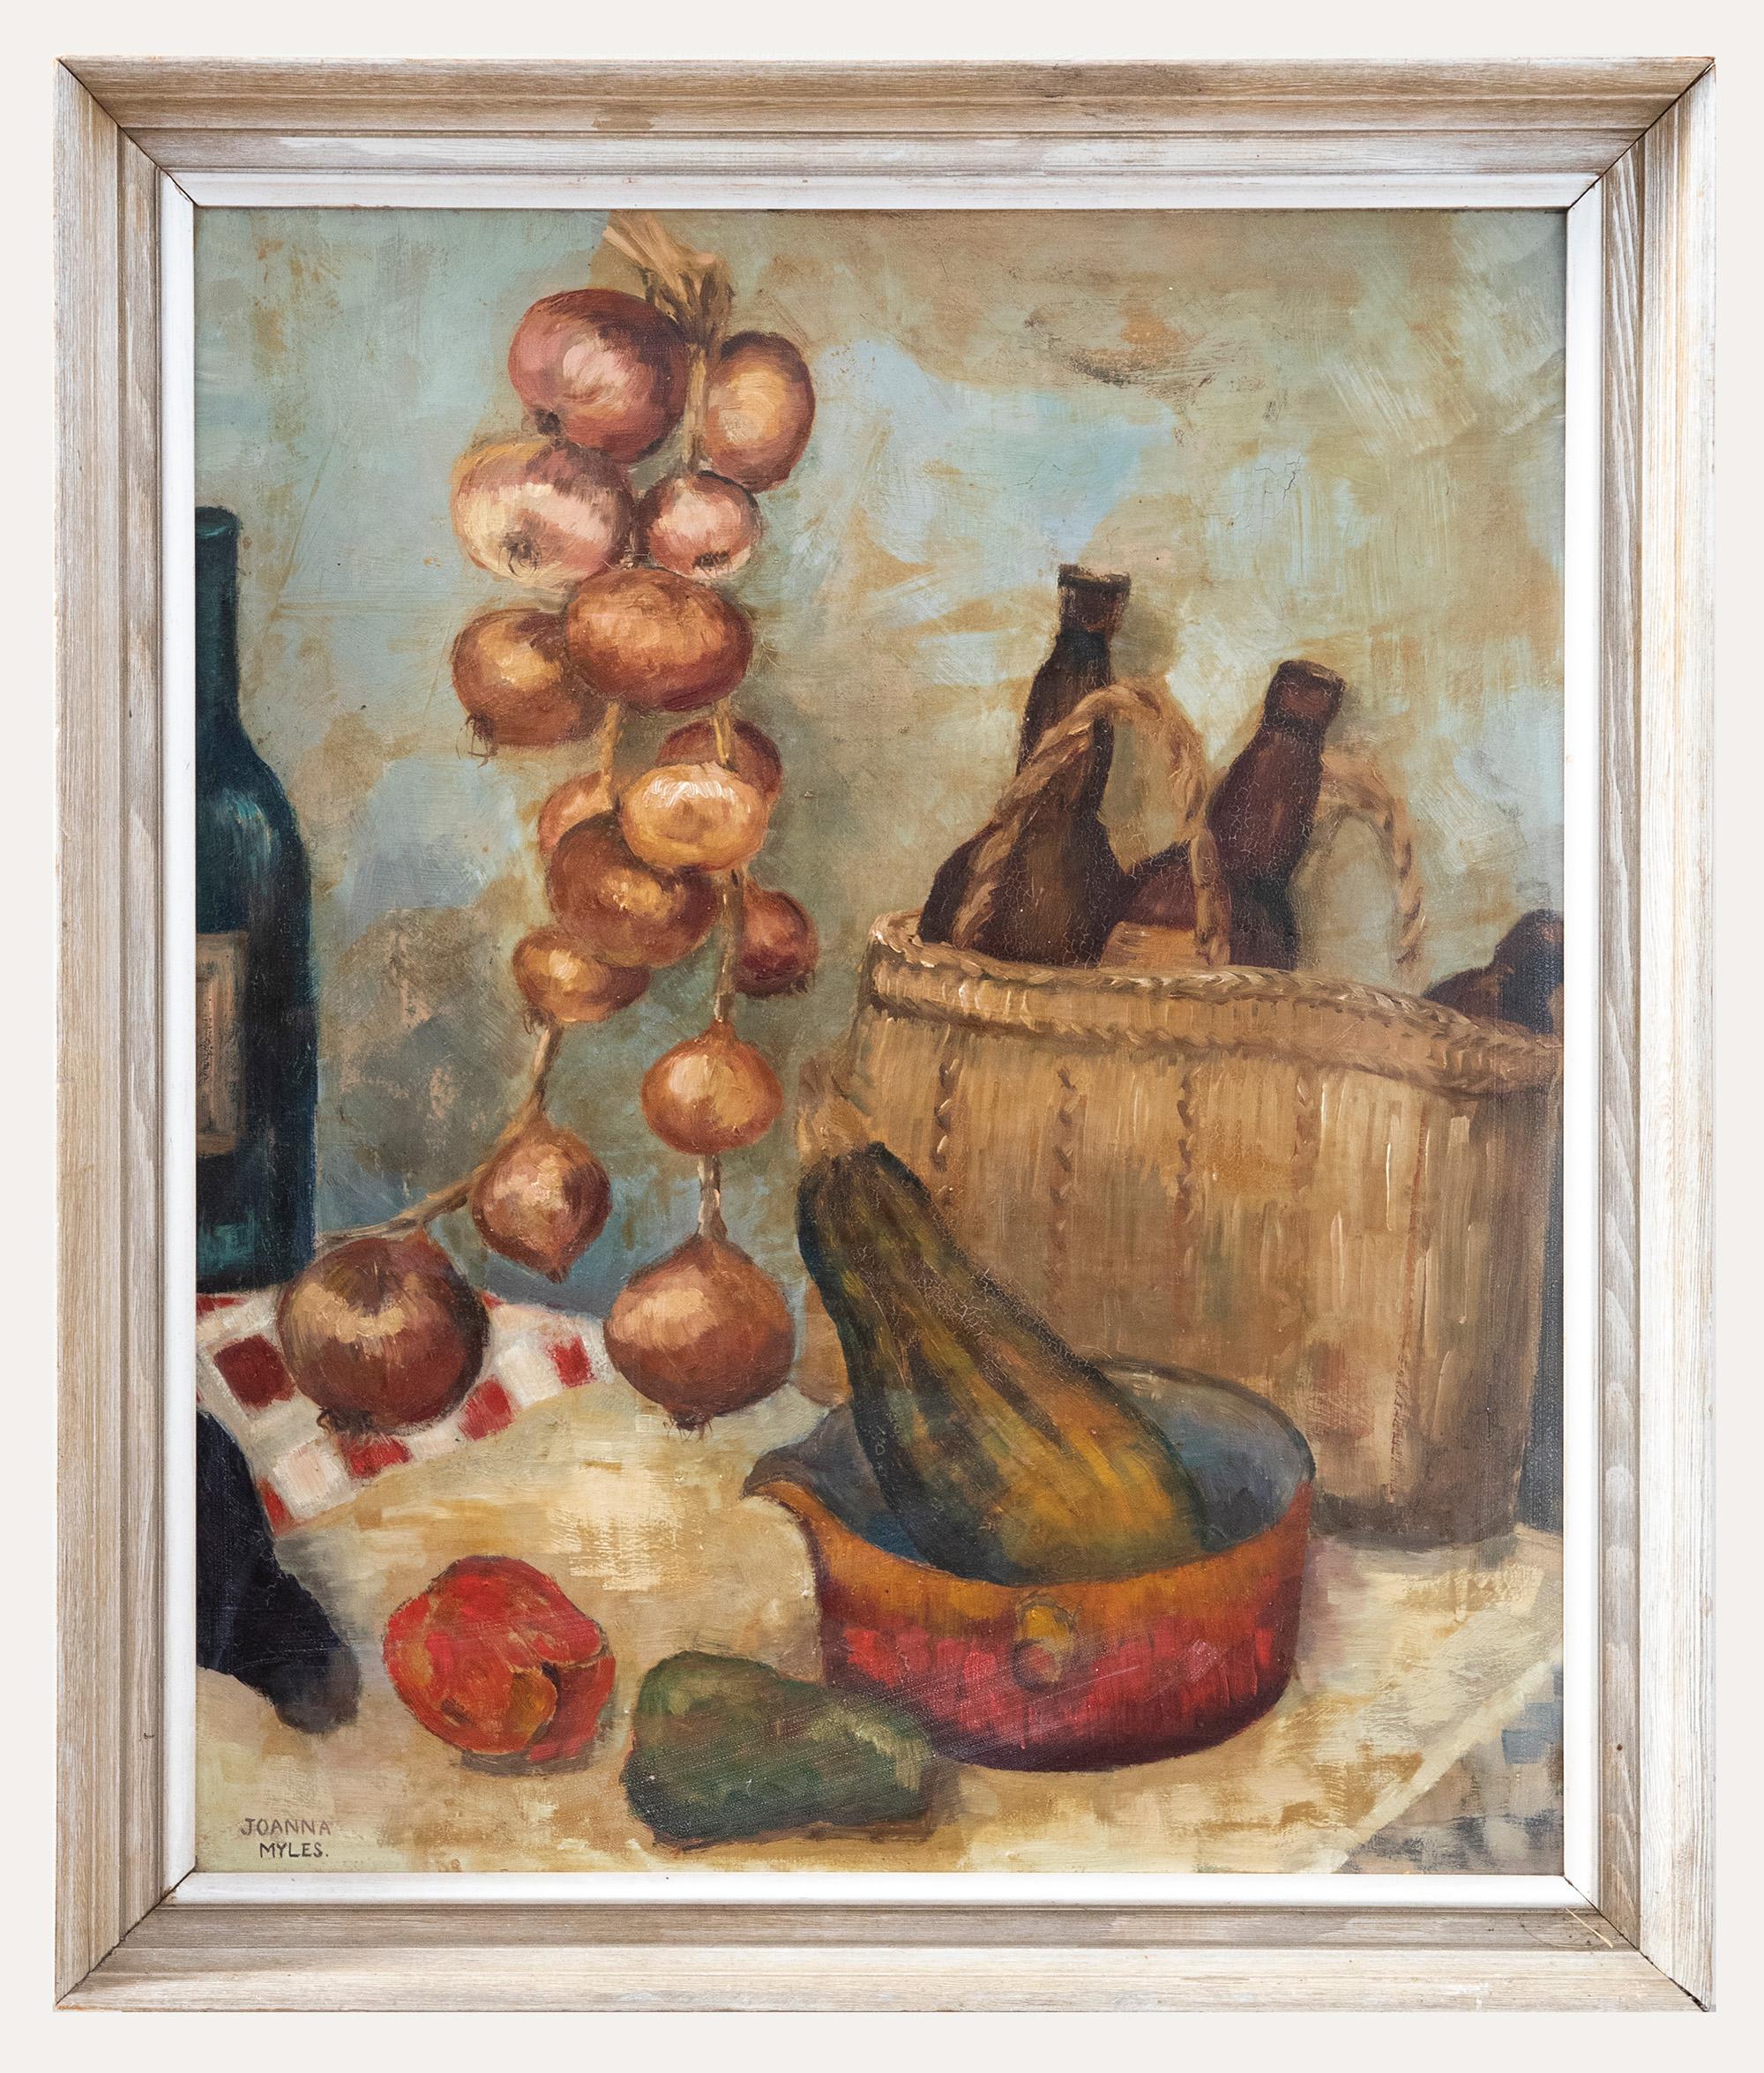 Unknown Still-Life Painting - Joanna Myles - Framed 20th Century Oil, Still Life with Vegetables